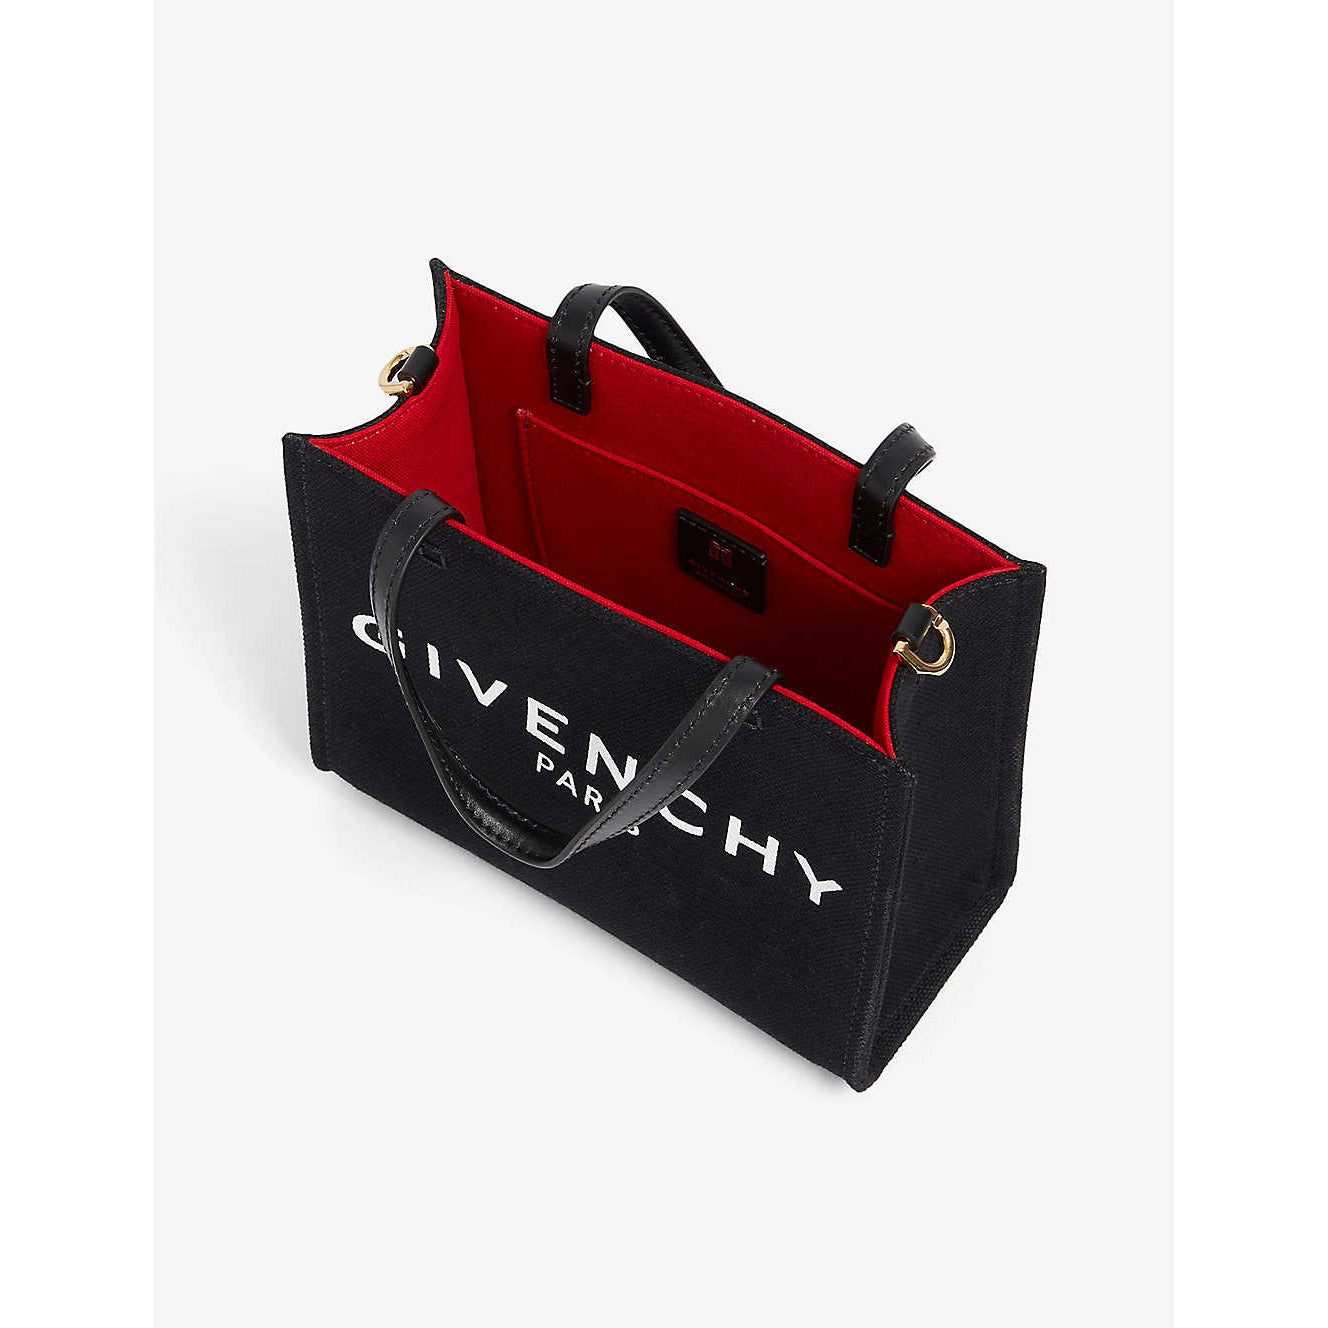 Givenchy Black Mini Tote shopping bag in canvas